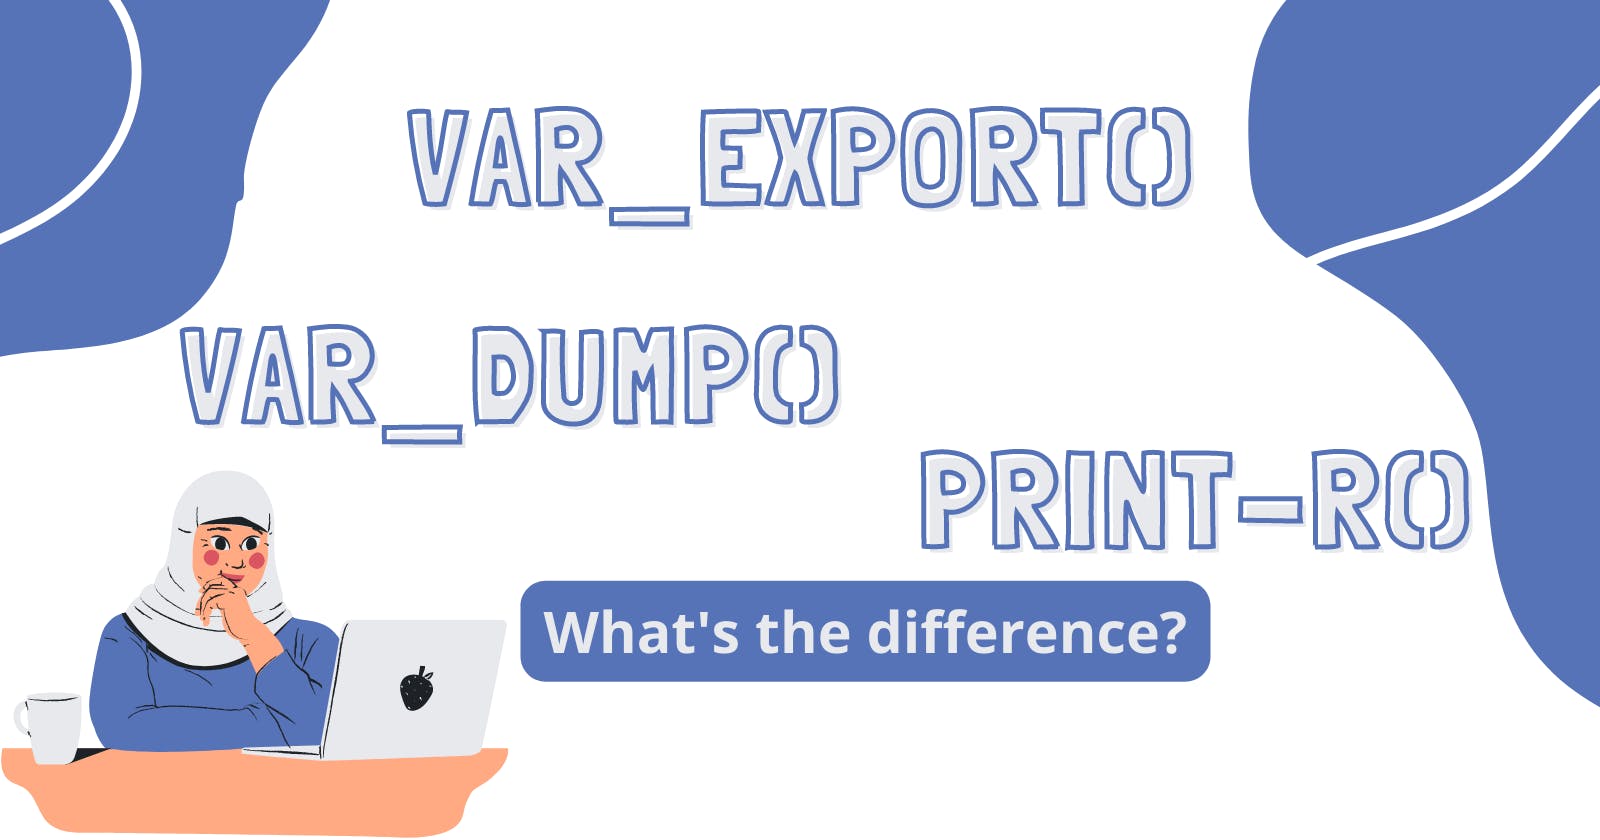 What is the difference between print-r(), var_dump(), and var_export() in PHP?